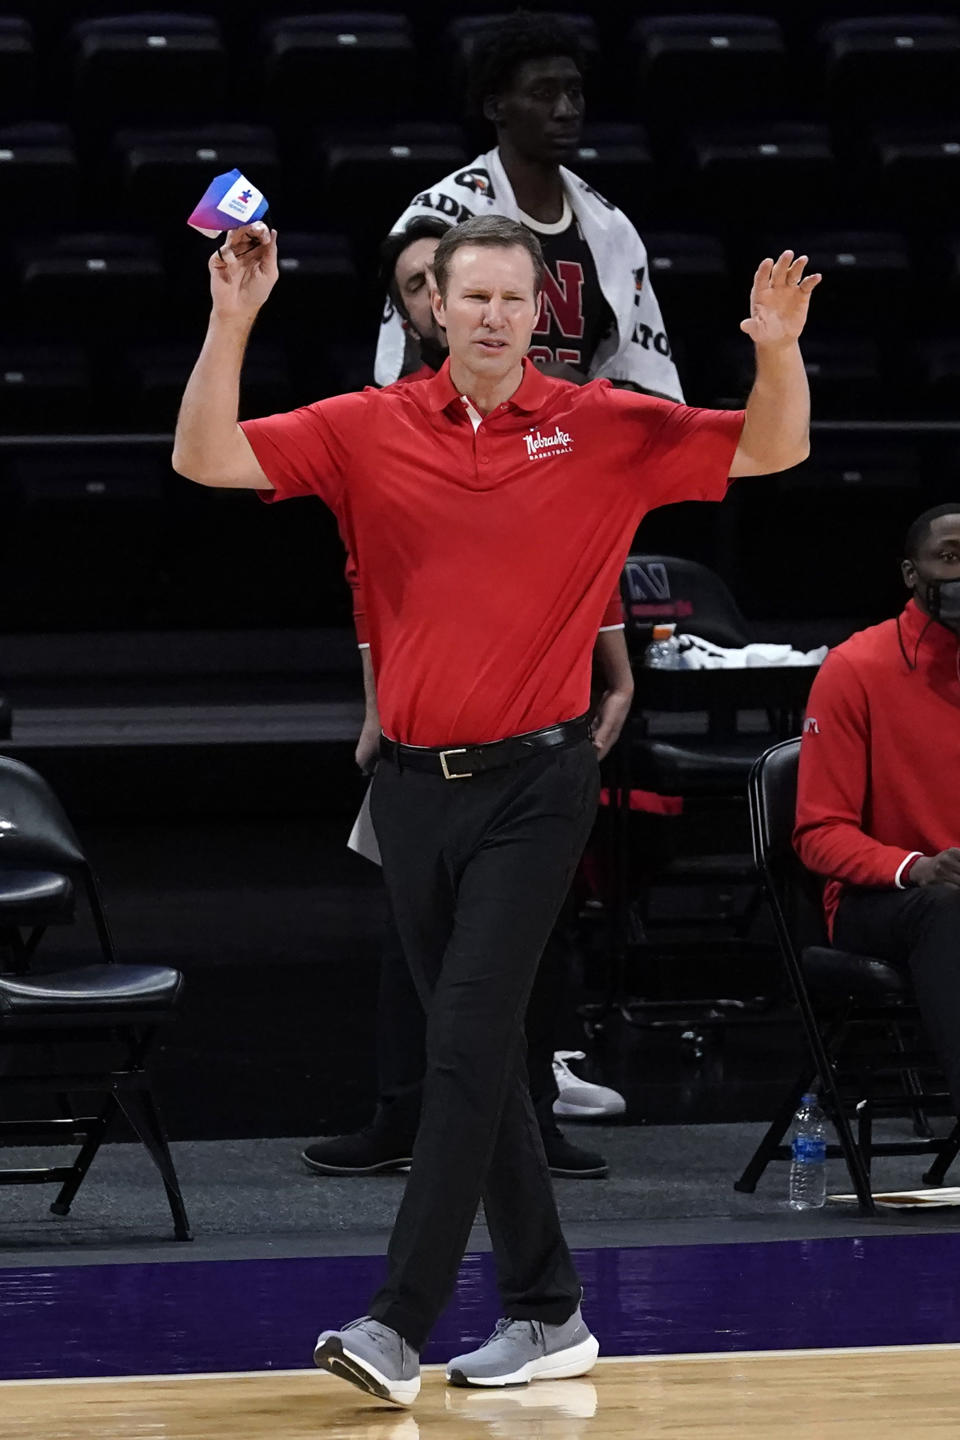 Nebraska head coach Fred Hoiberg reacts to a call during the second half of an NCAA college basketball game against Northwestern in Evanston, Ill., Sunday, March 7, 2021. (AP Photo/Nam Y. Huh)